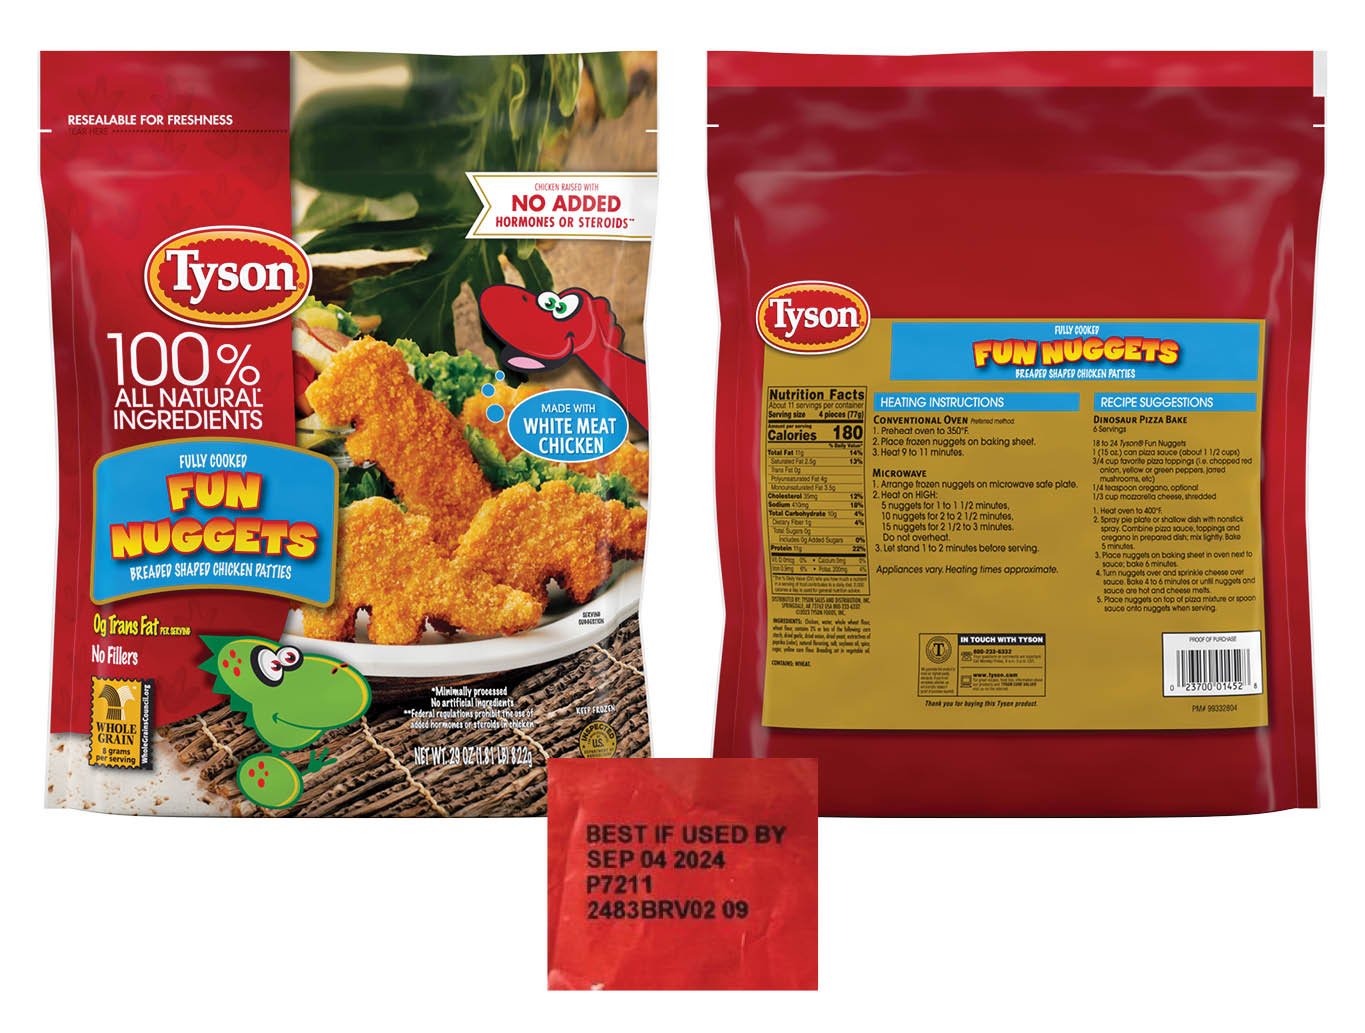 Tyson recalls nearly 30,000 pounds of frozen nuggets after reports of metal found